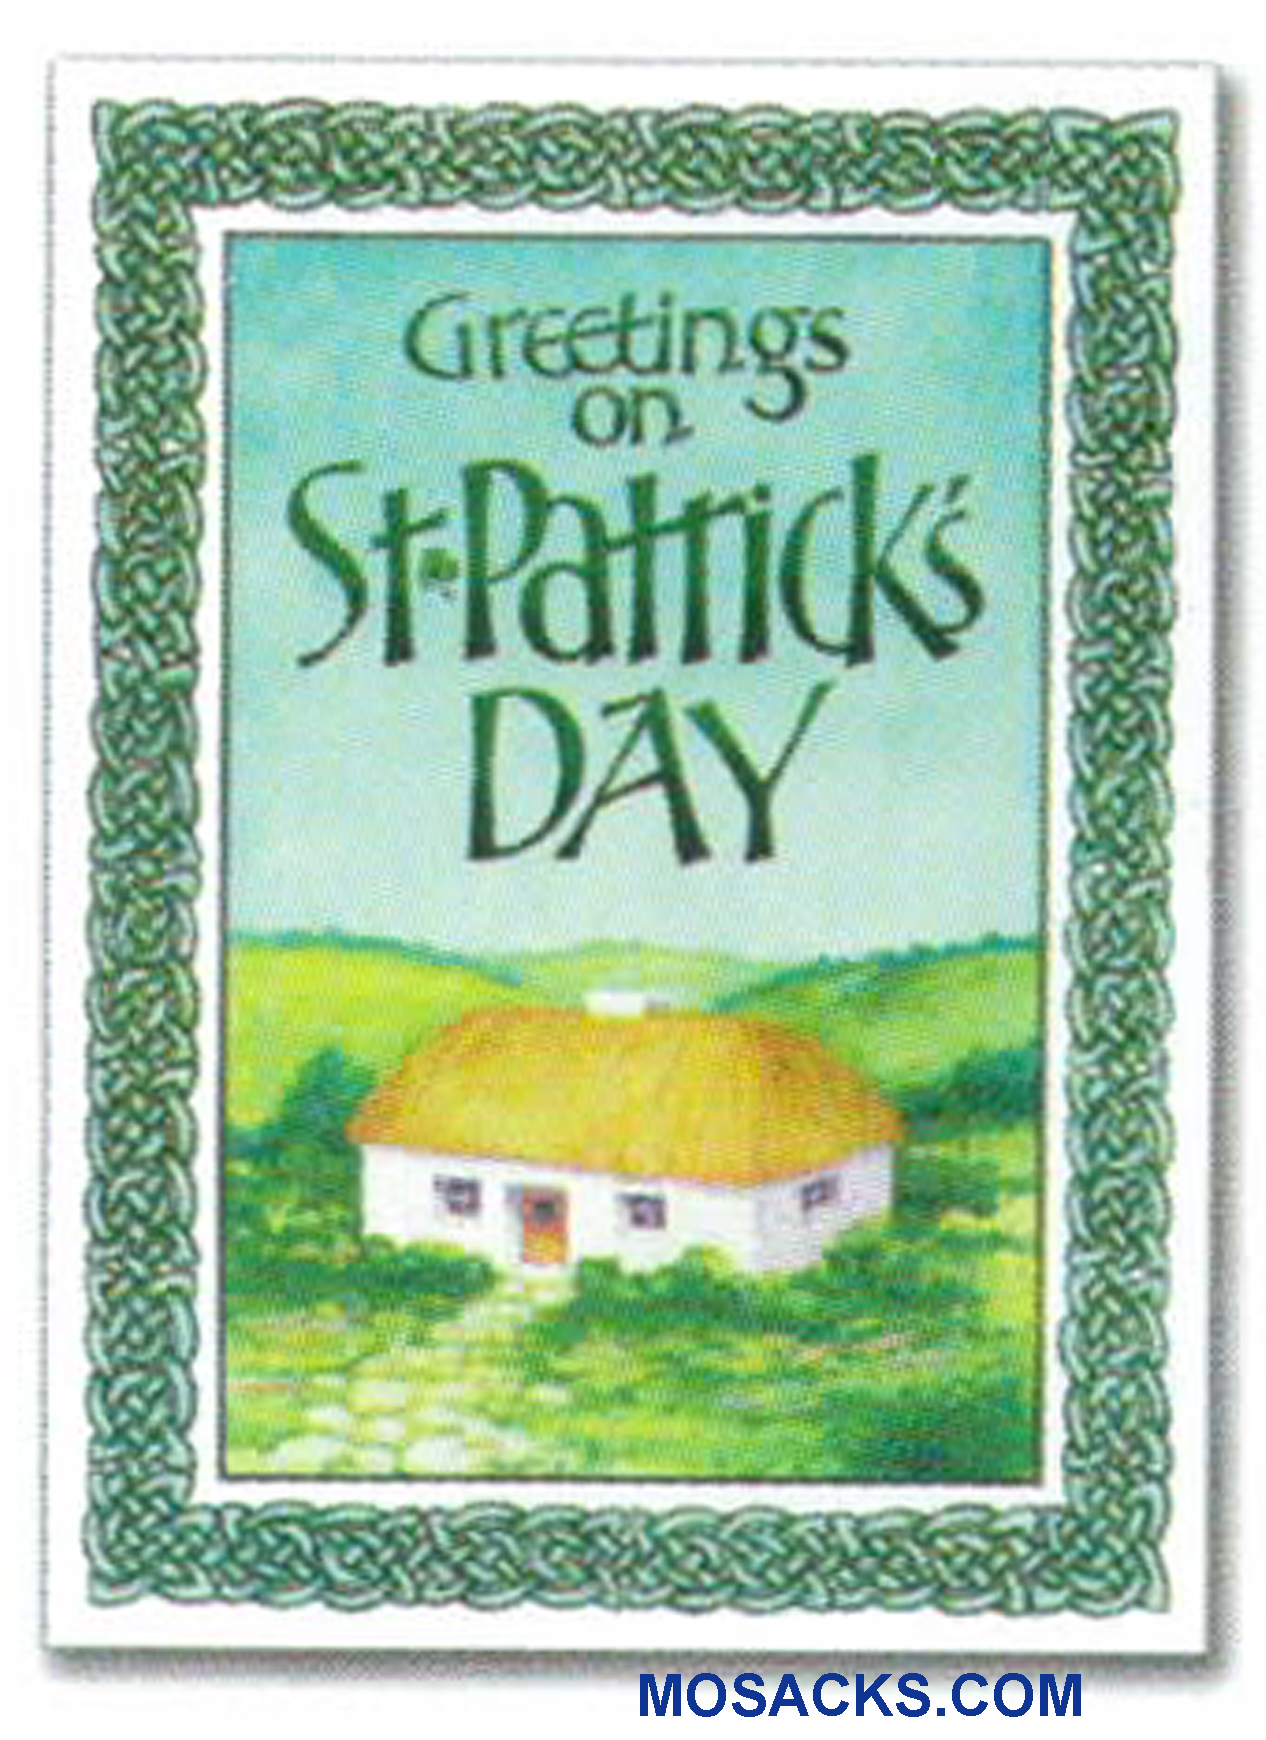 Greetings On St. Patrick's Day Greeting Card -WCA5152